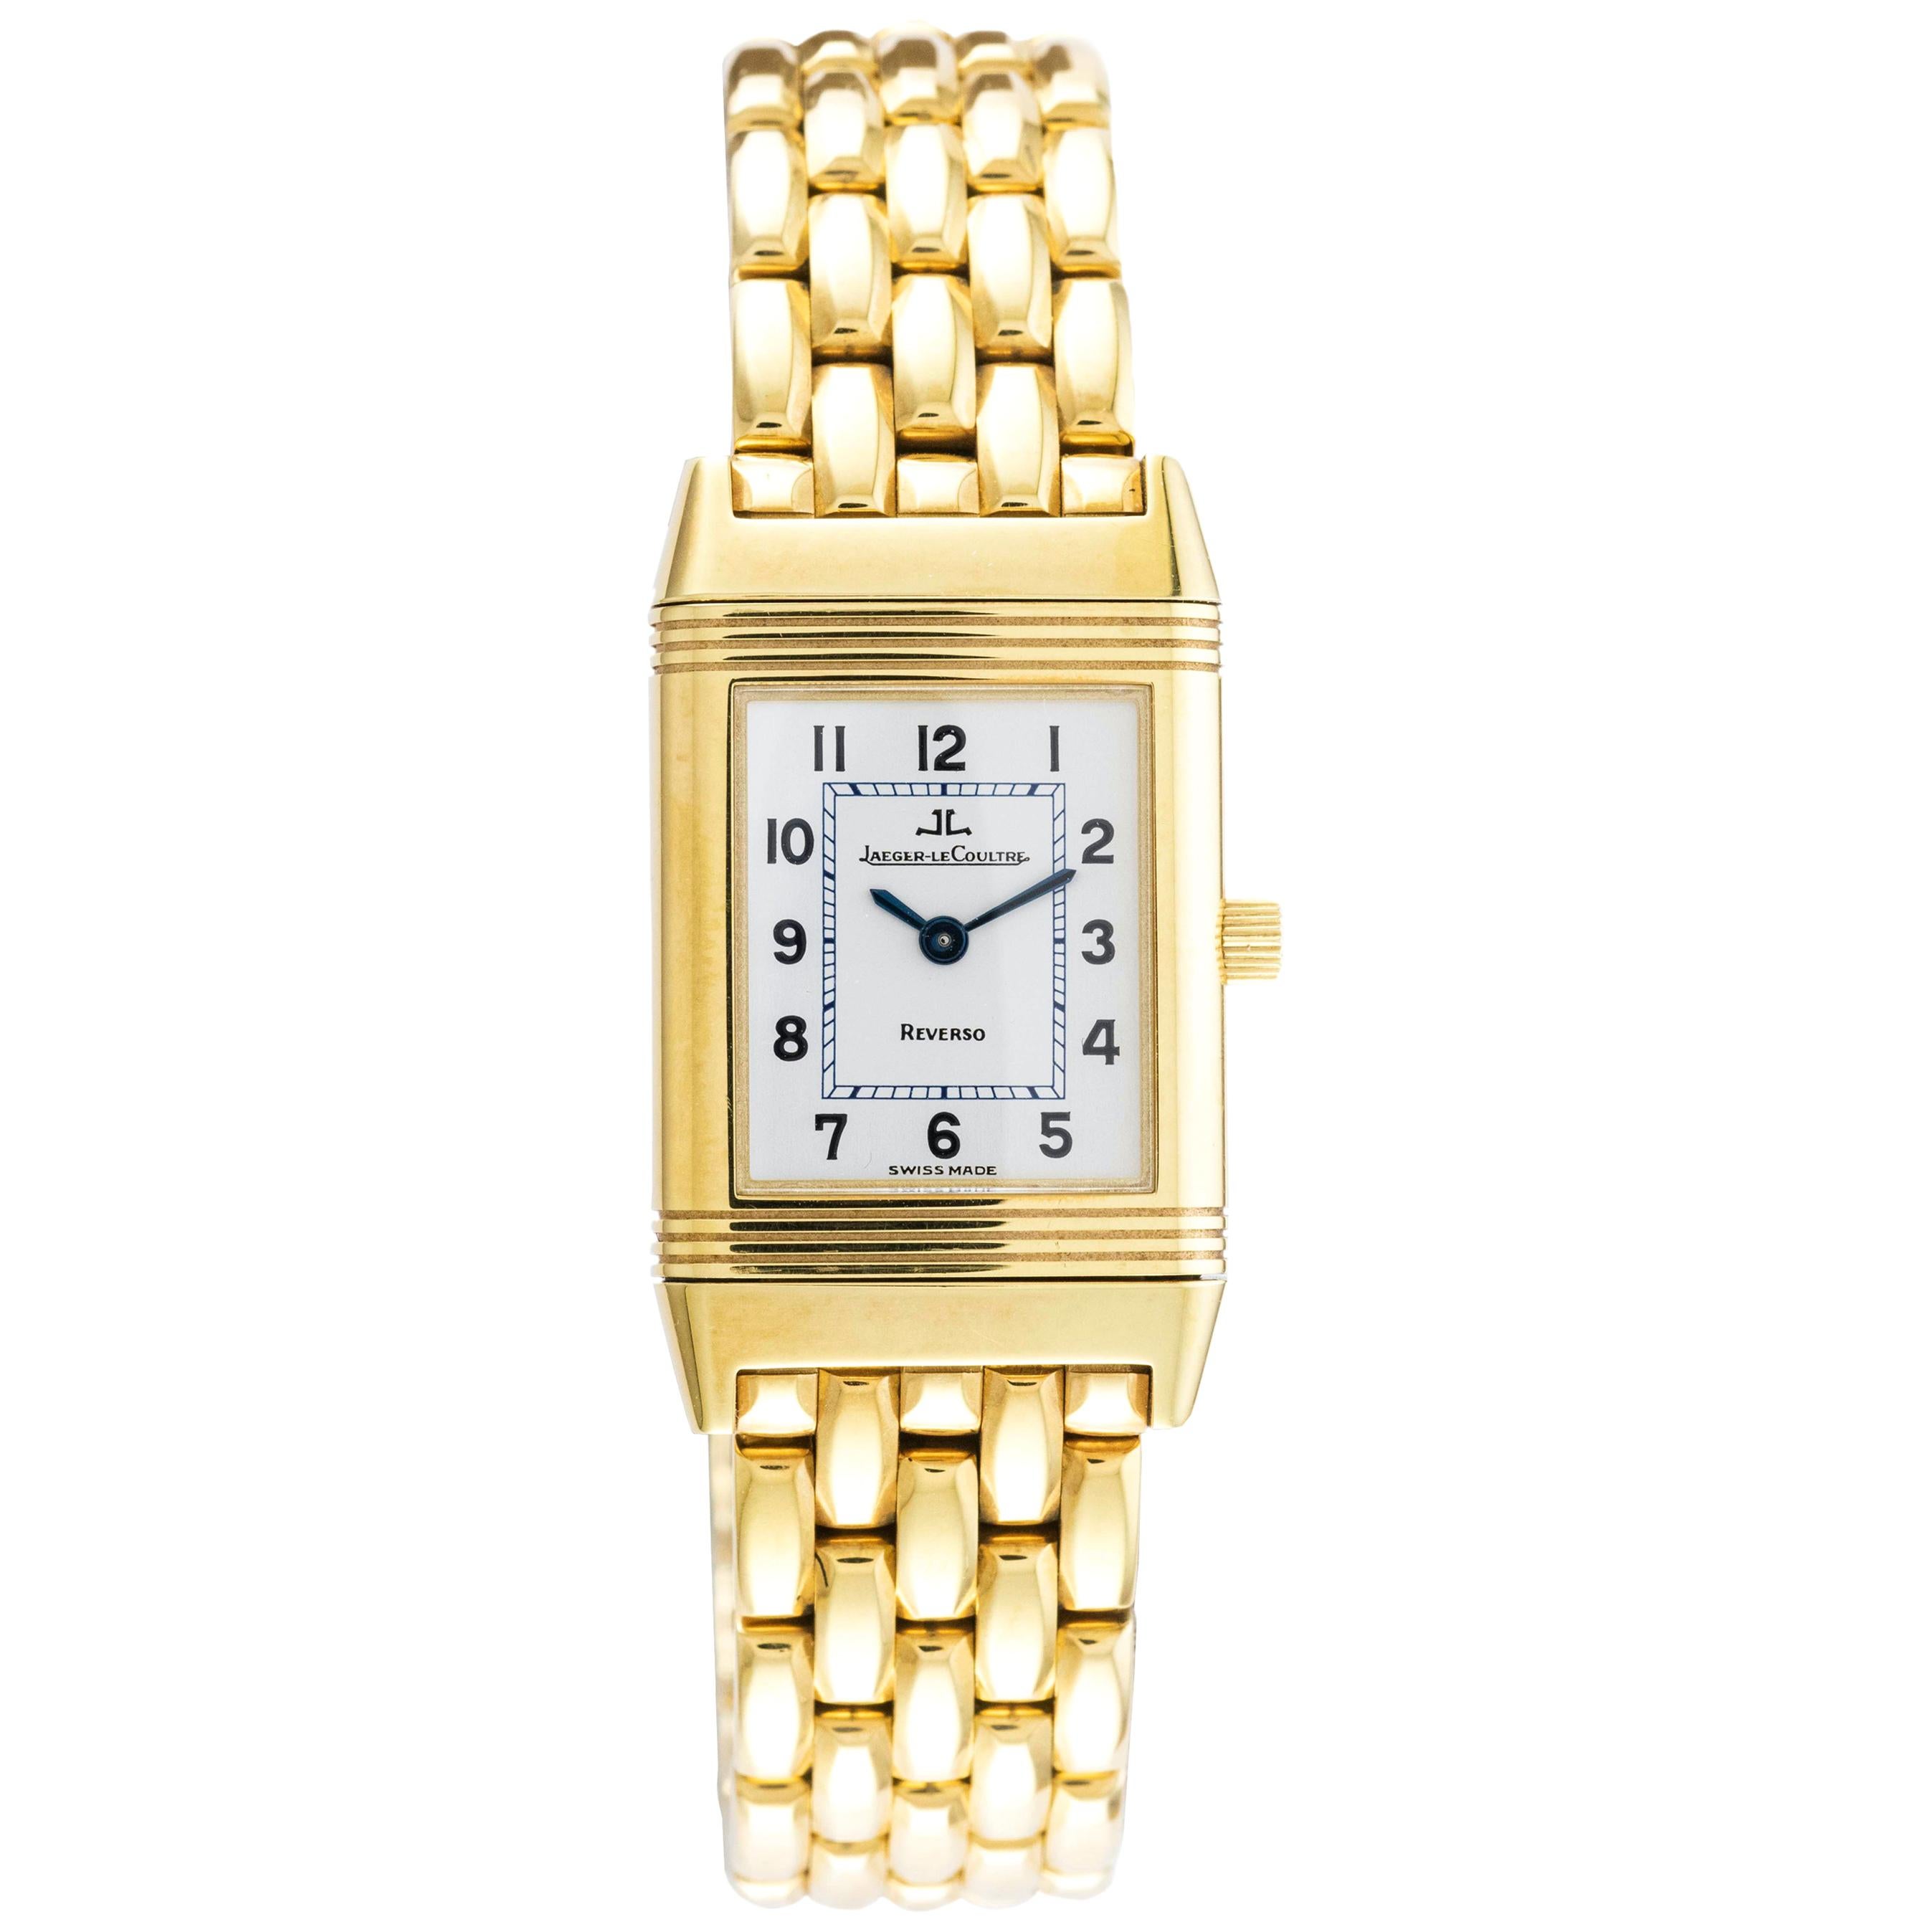 18 Karat Yellow Gold New Old Stock Jaeger-LeCoultre Reverso Lady Watch